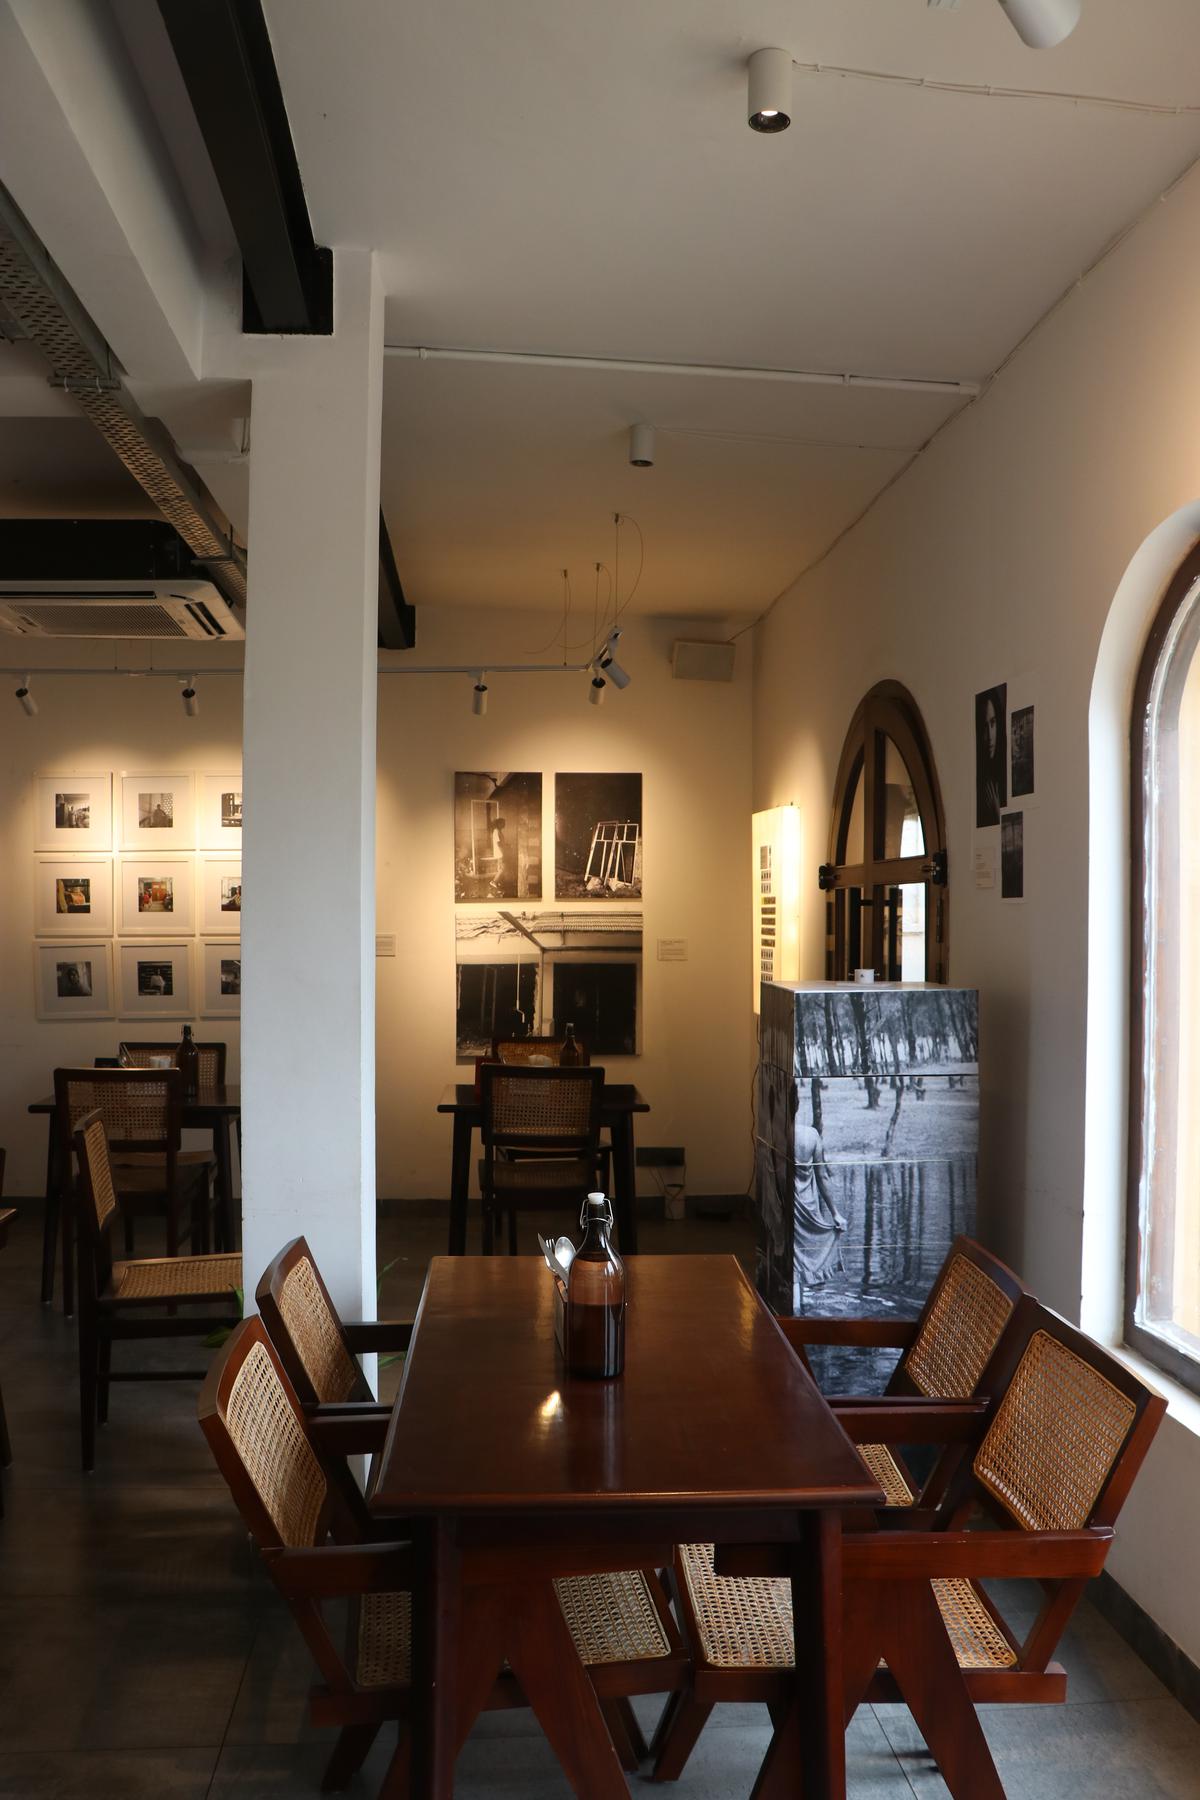 Photography display at Katha Specialty Coffee and Artisanal Bakehouse